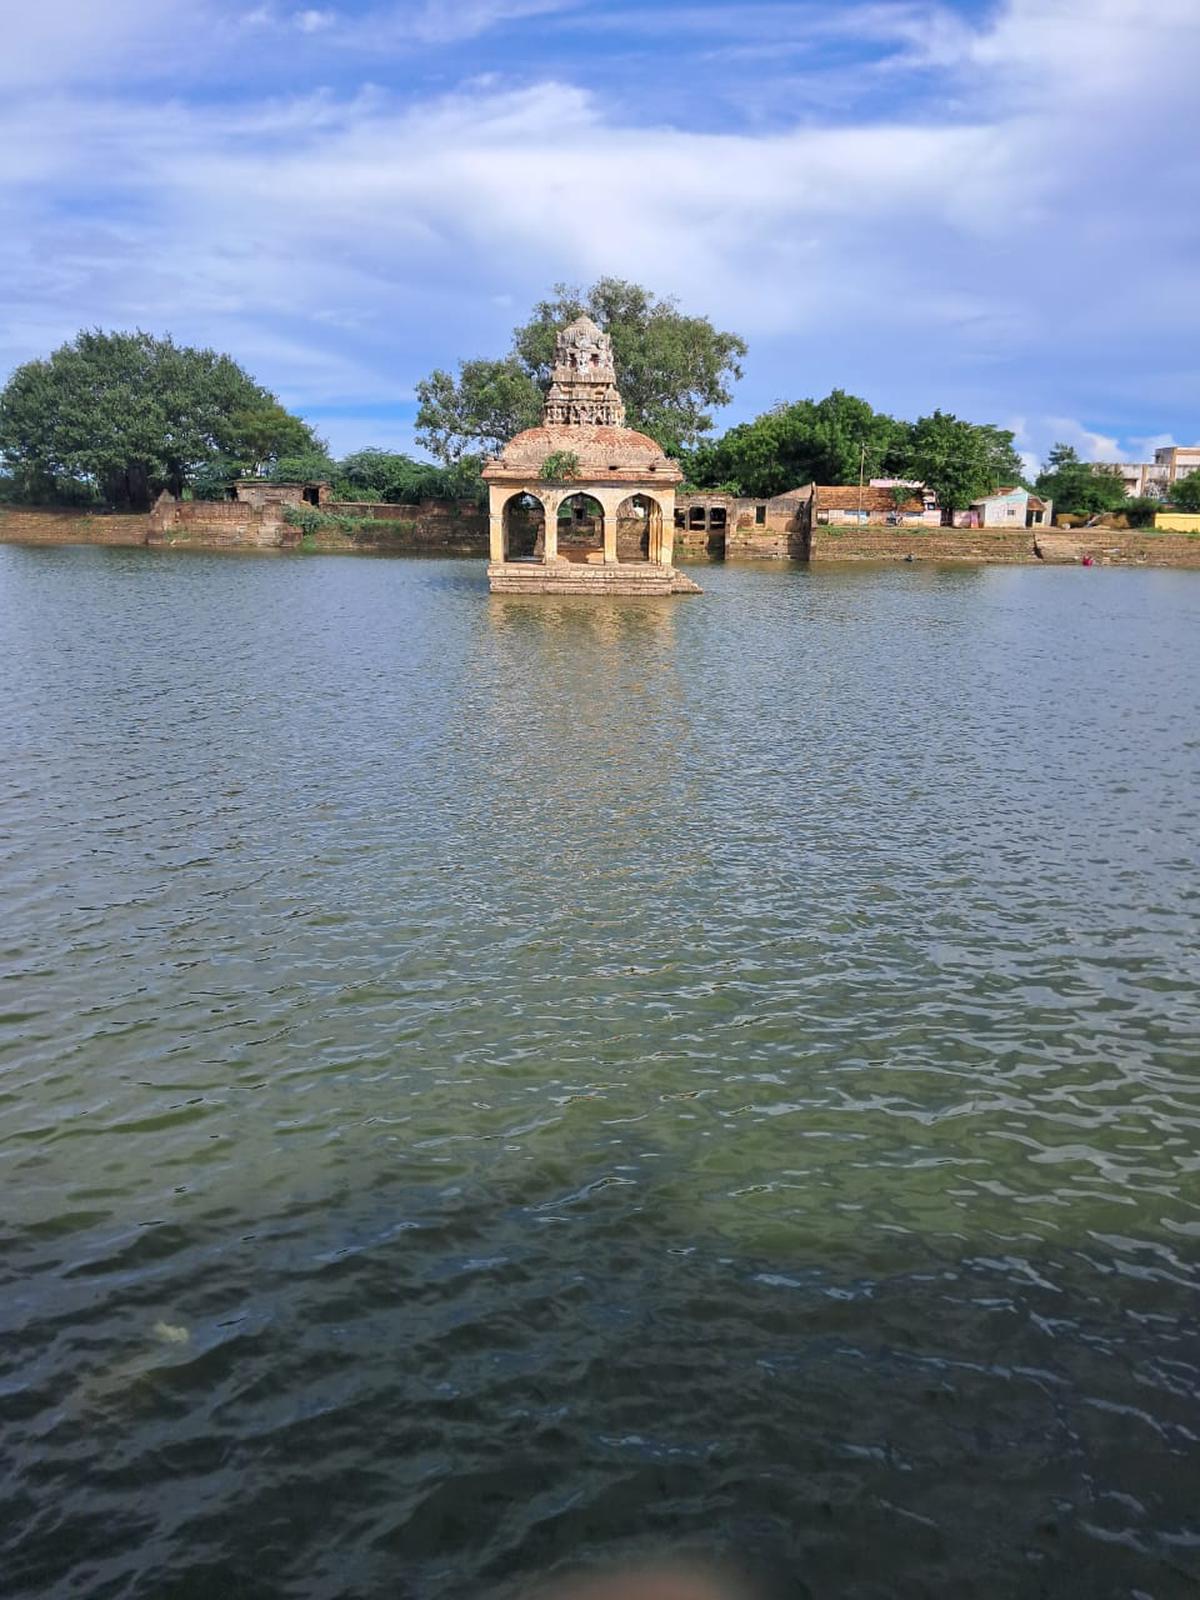 A view of the Neerali Mandapam in the midst of the temple tank